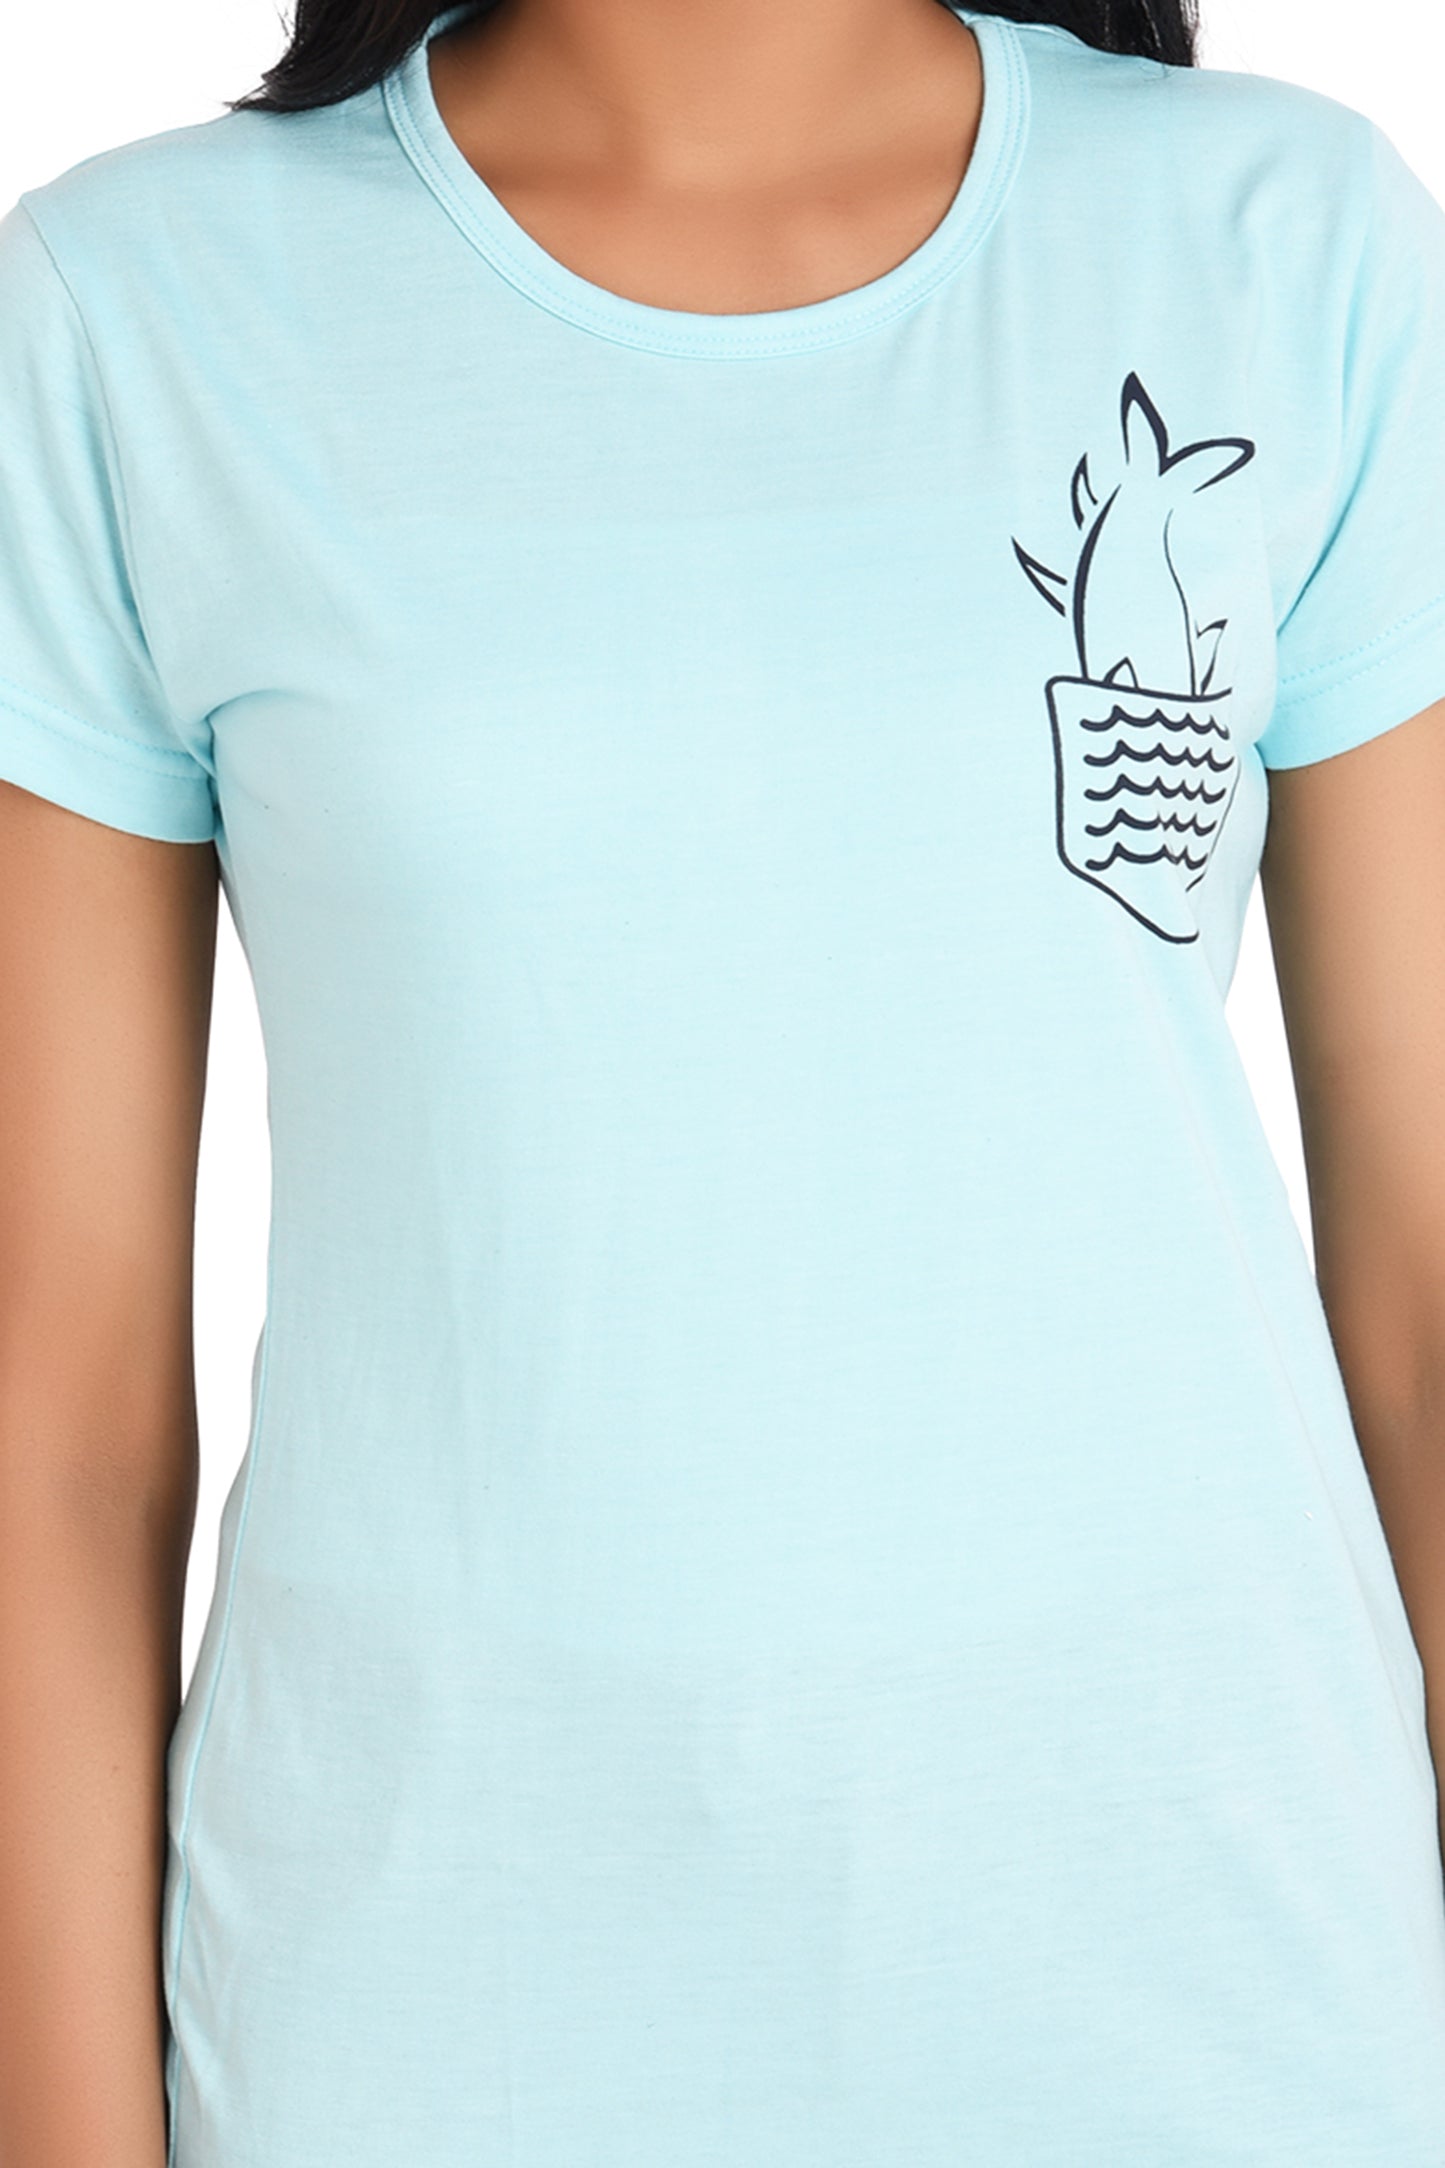 NEO GARMENTS Women's Cotton Round Neck Plus T-shirt - FISH | SIZE FROM S-32" TO 8XL-52"